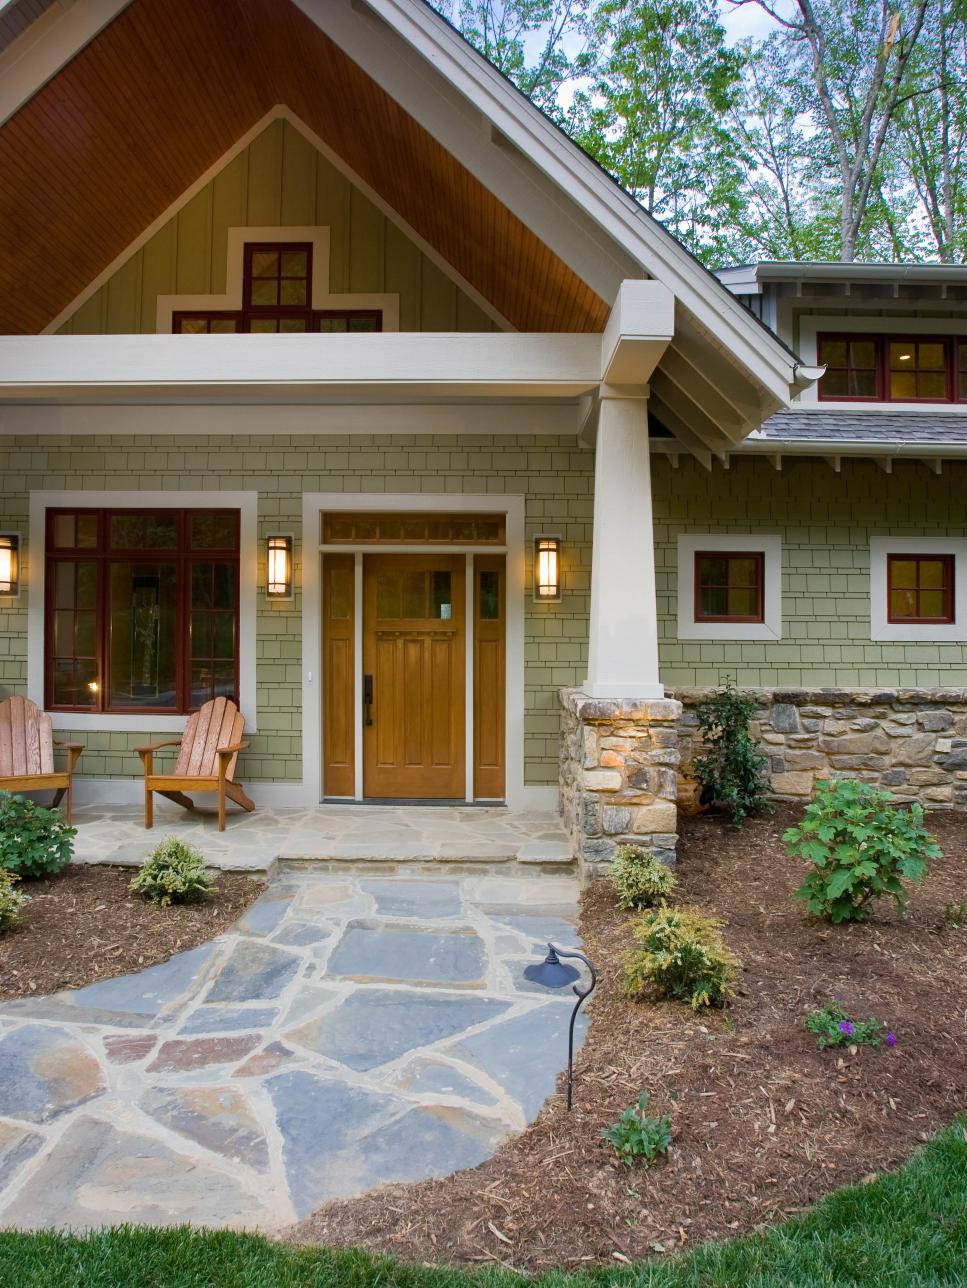 Craftsman-Style Home With Green Siding and Stone Walkway